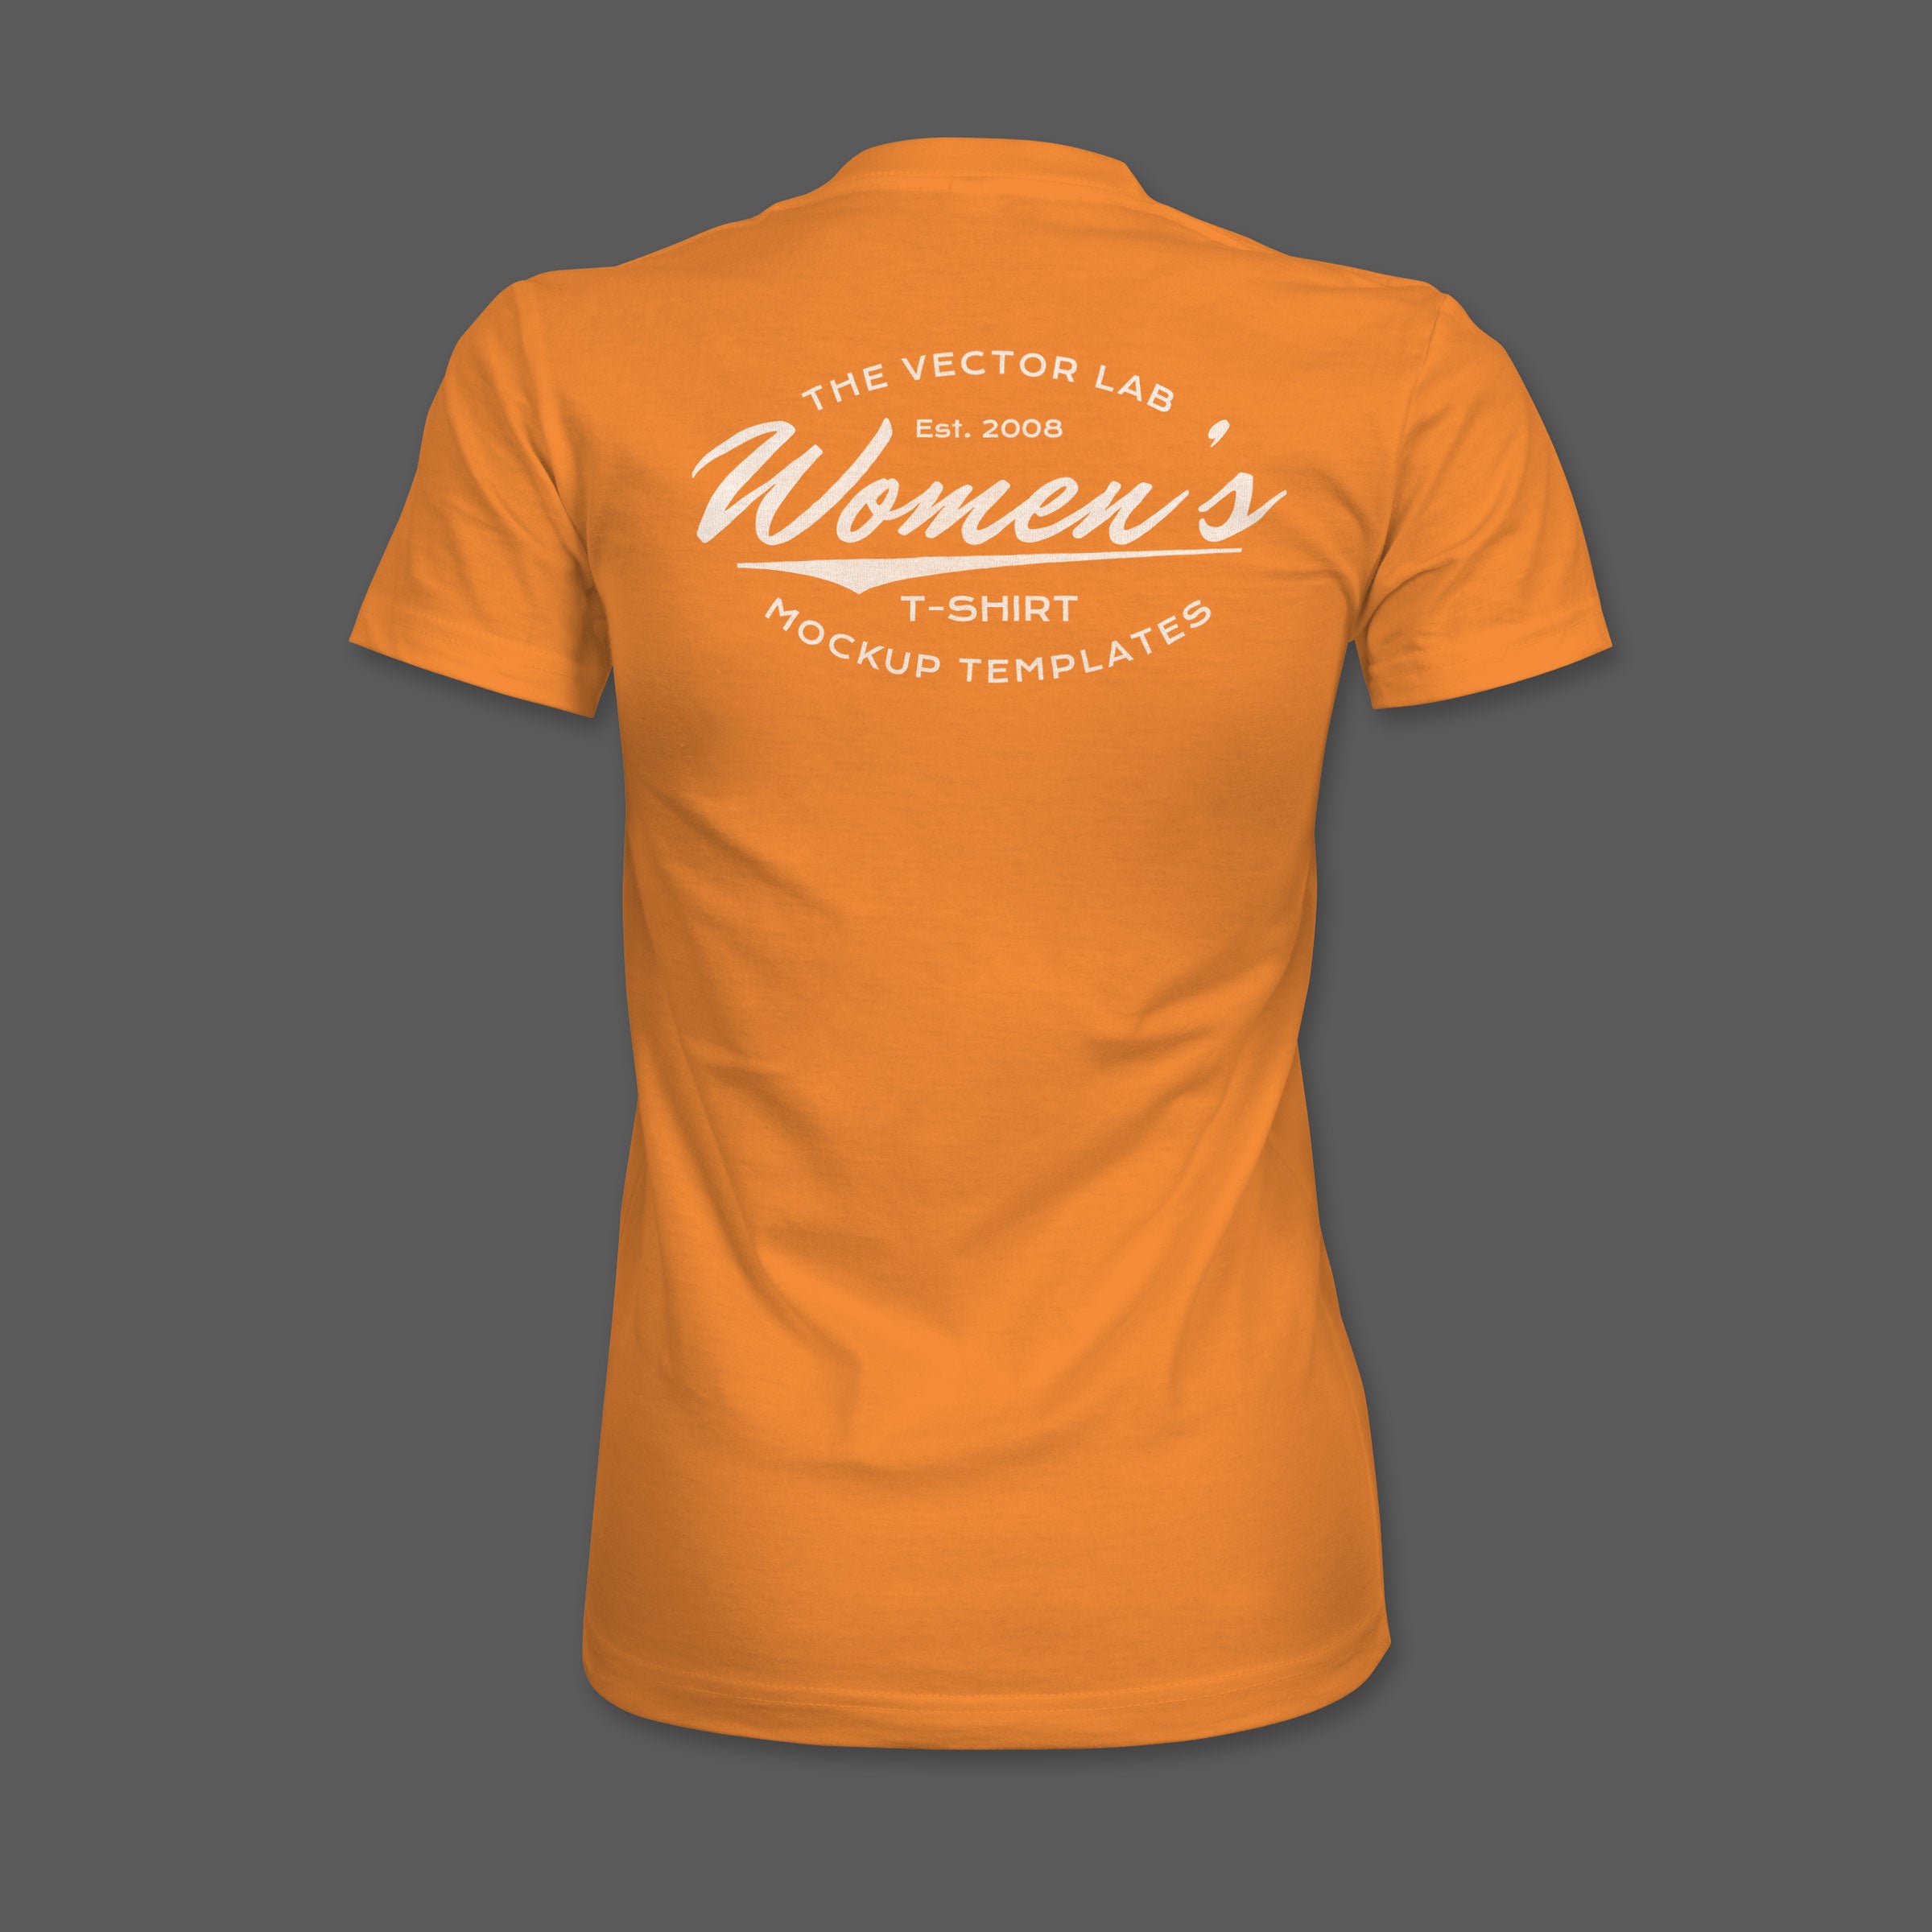 Download Women's T-Shirt Mockup Templates (Version 5.0) - TheVectorLab